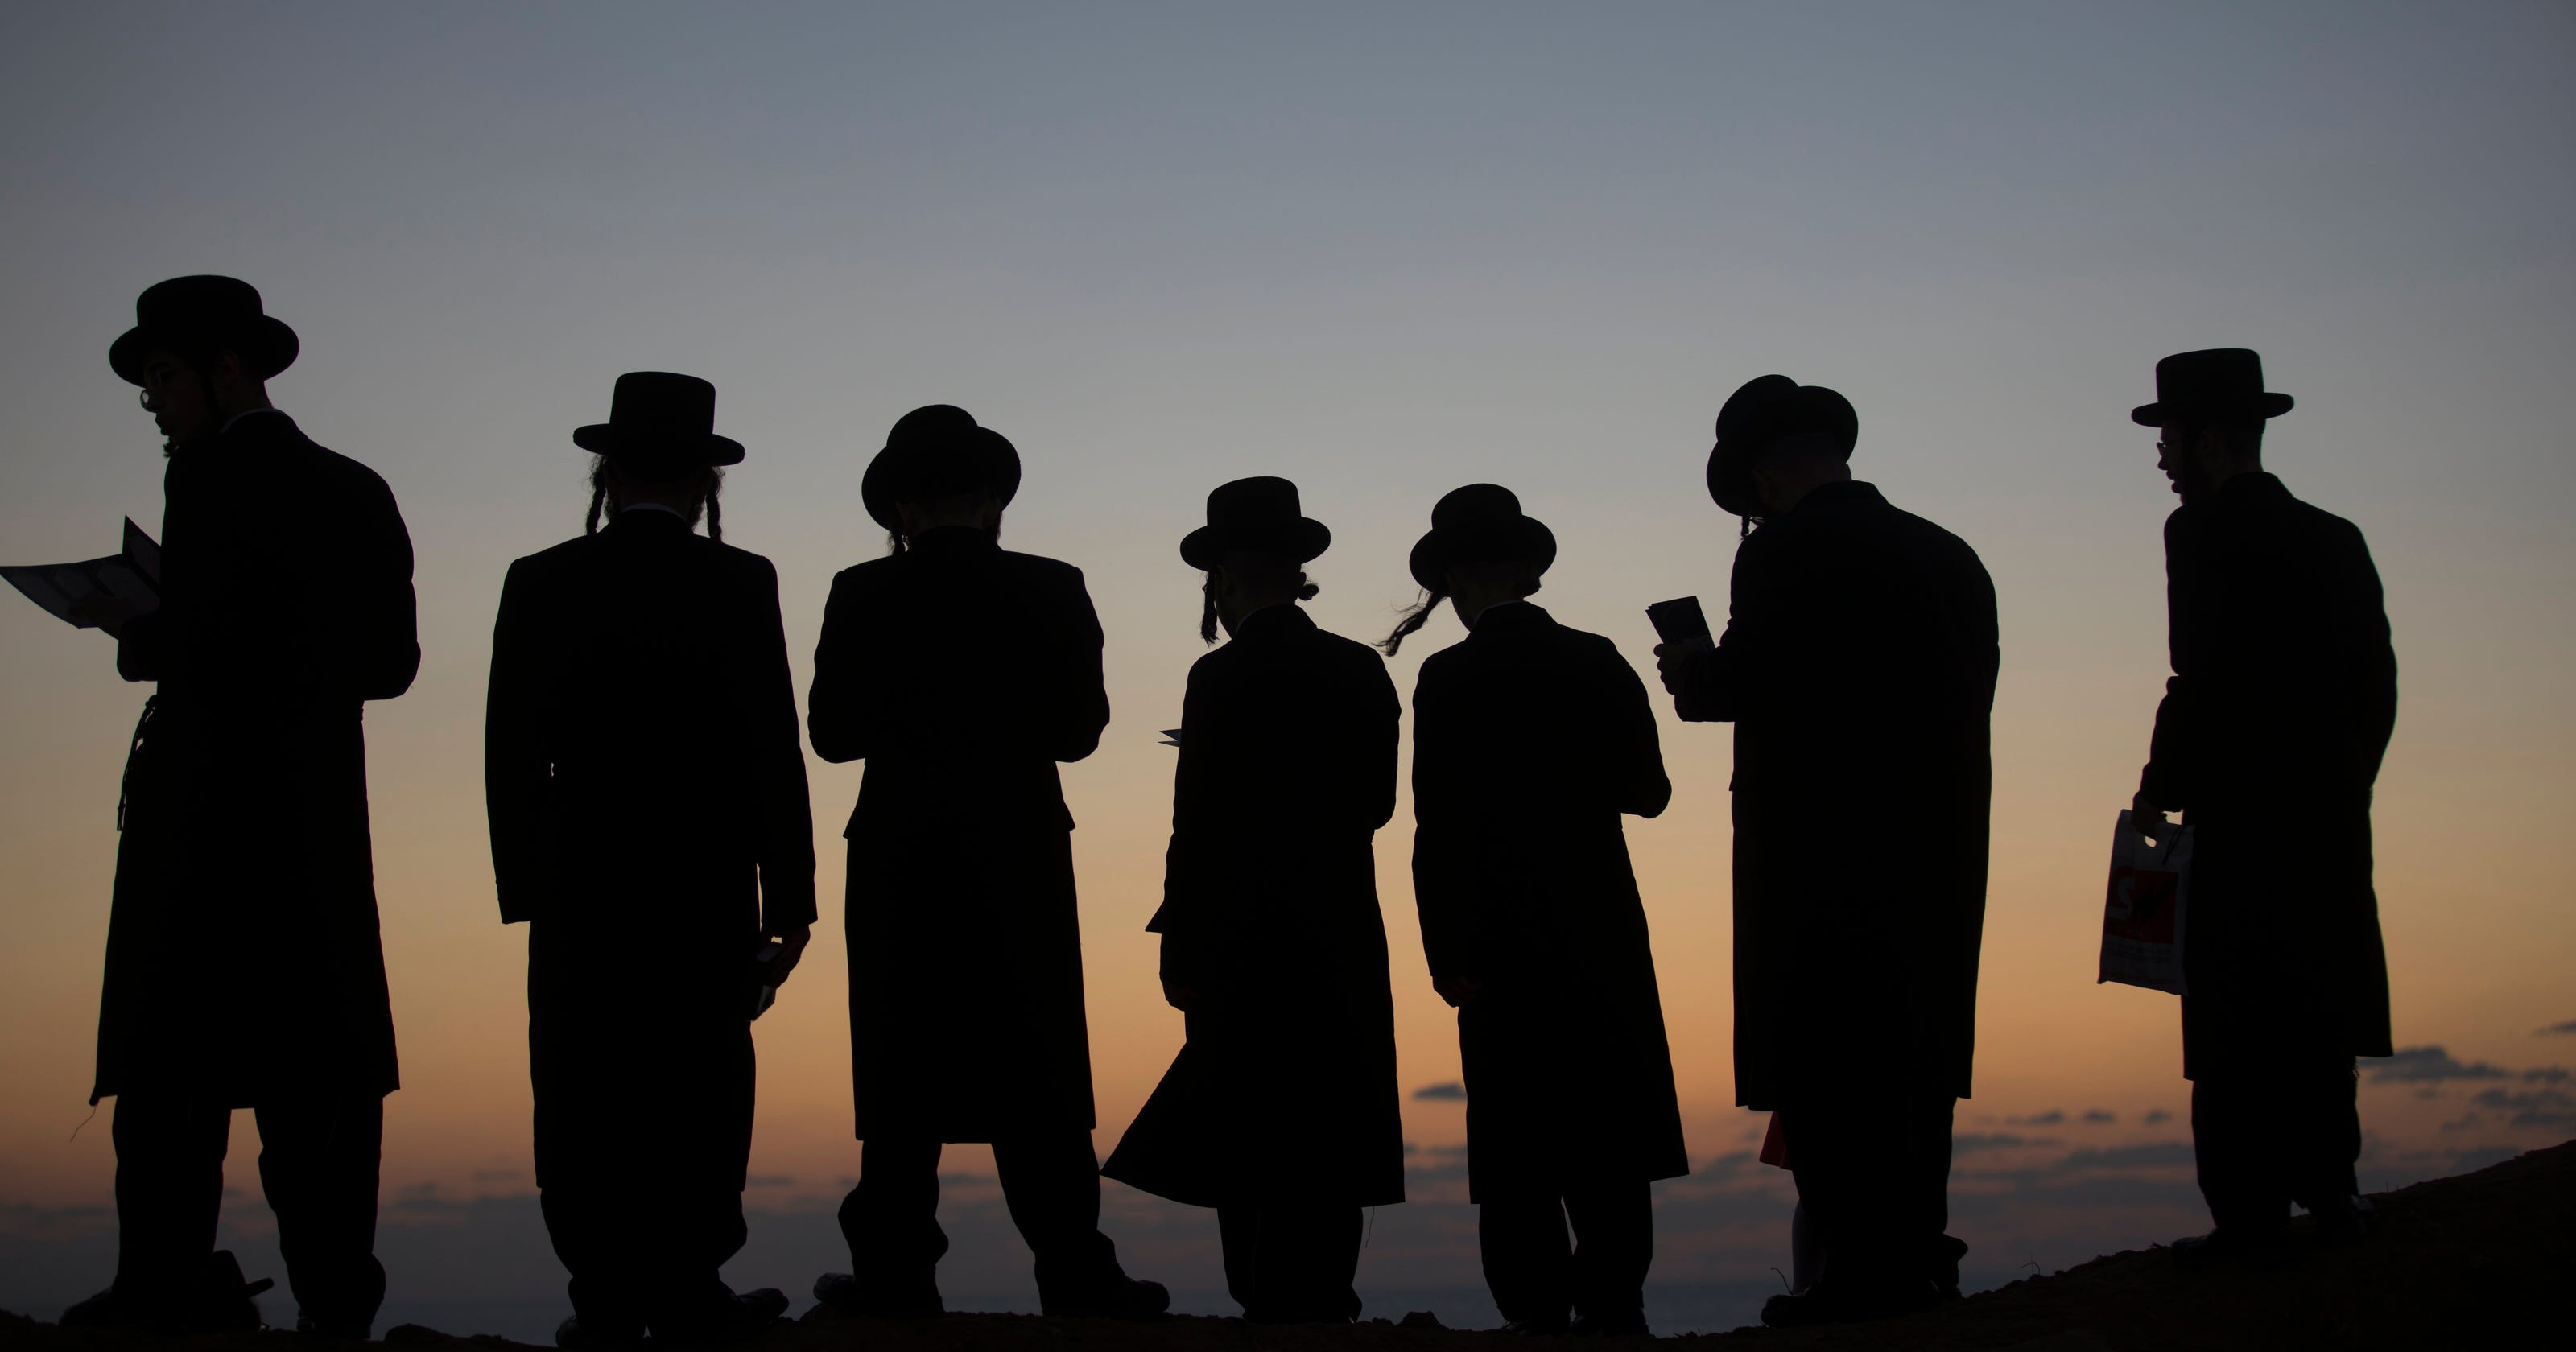 yom-kippur-what-is-the-jewish-holy-day-of-atonement-all-about